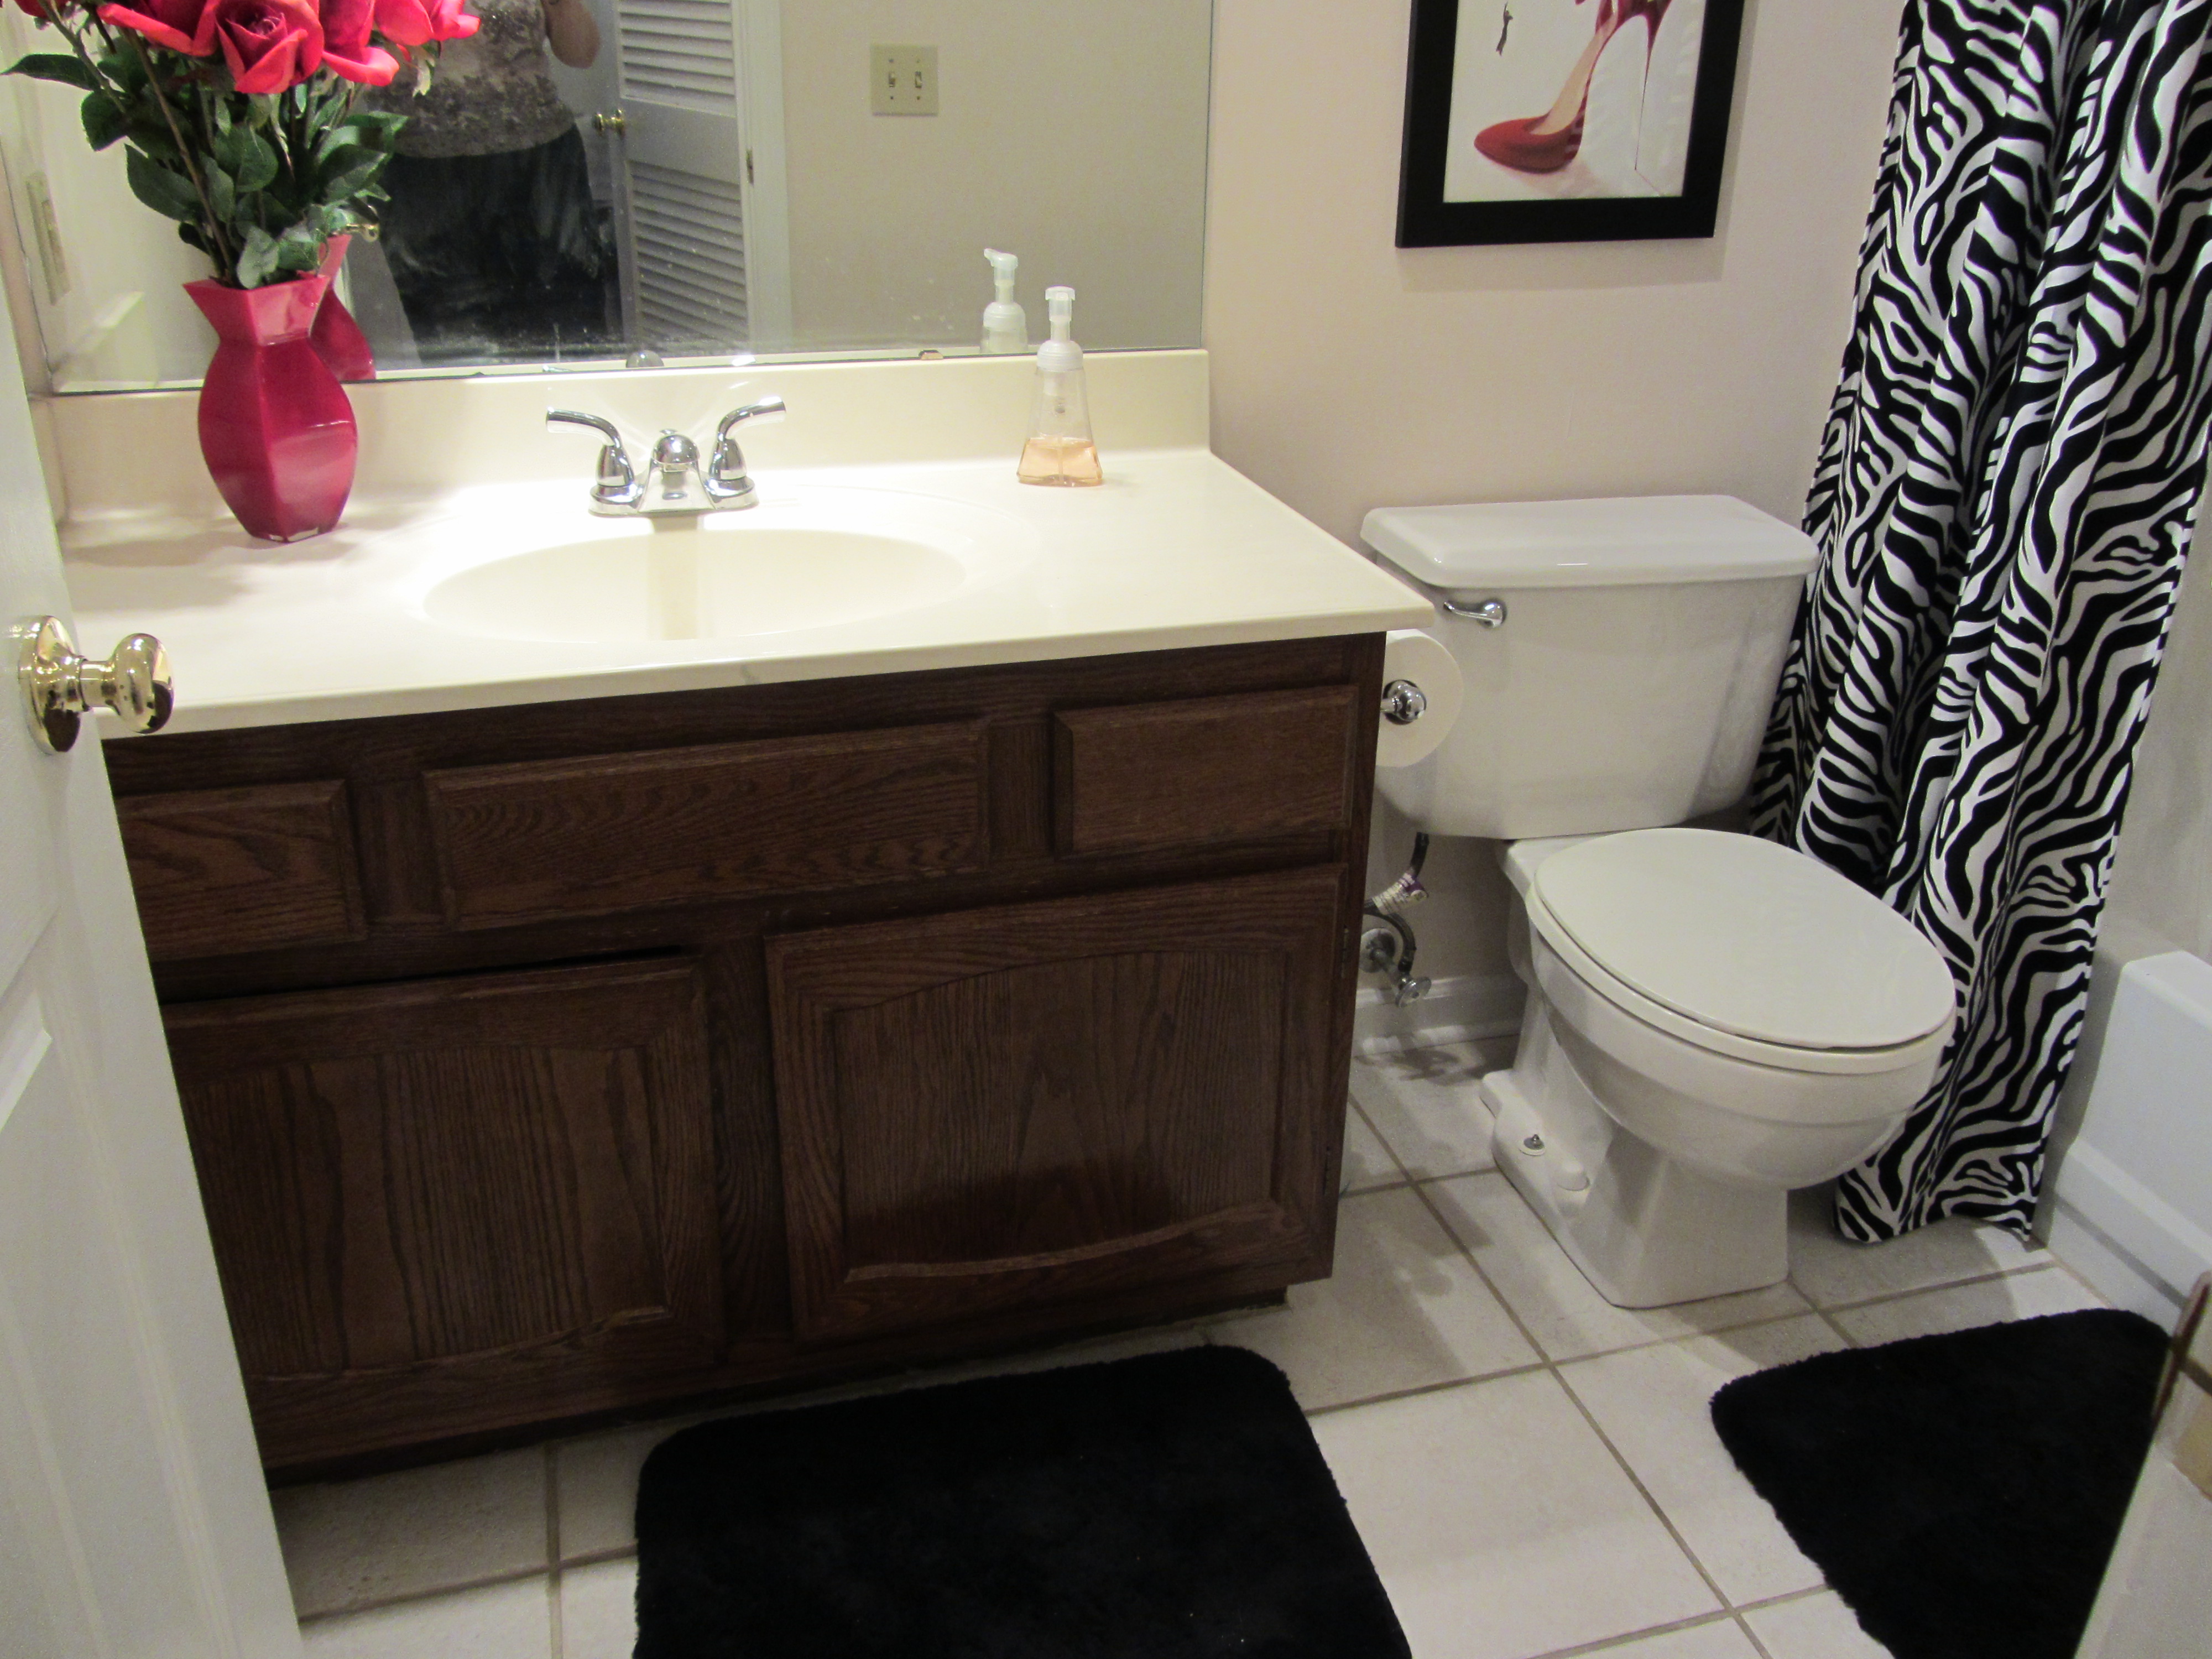 Bathroom Renovation Cost  How Much to Budget for a Bathroom Remodel